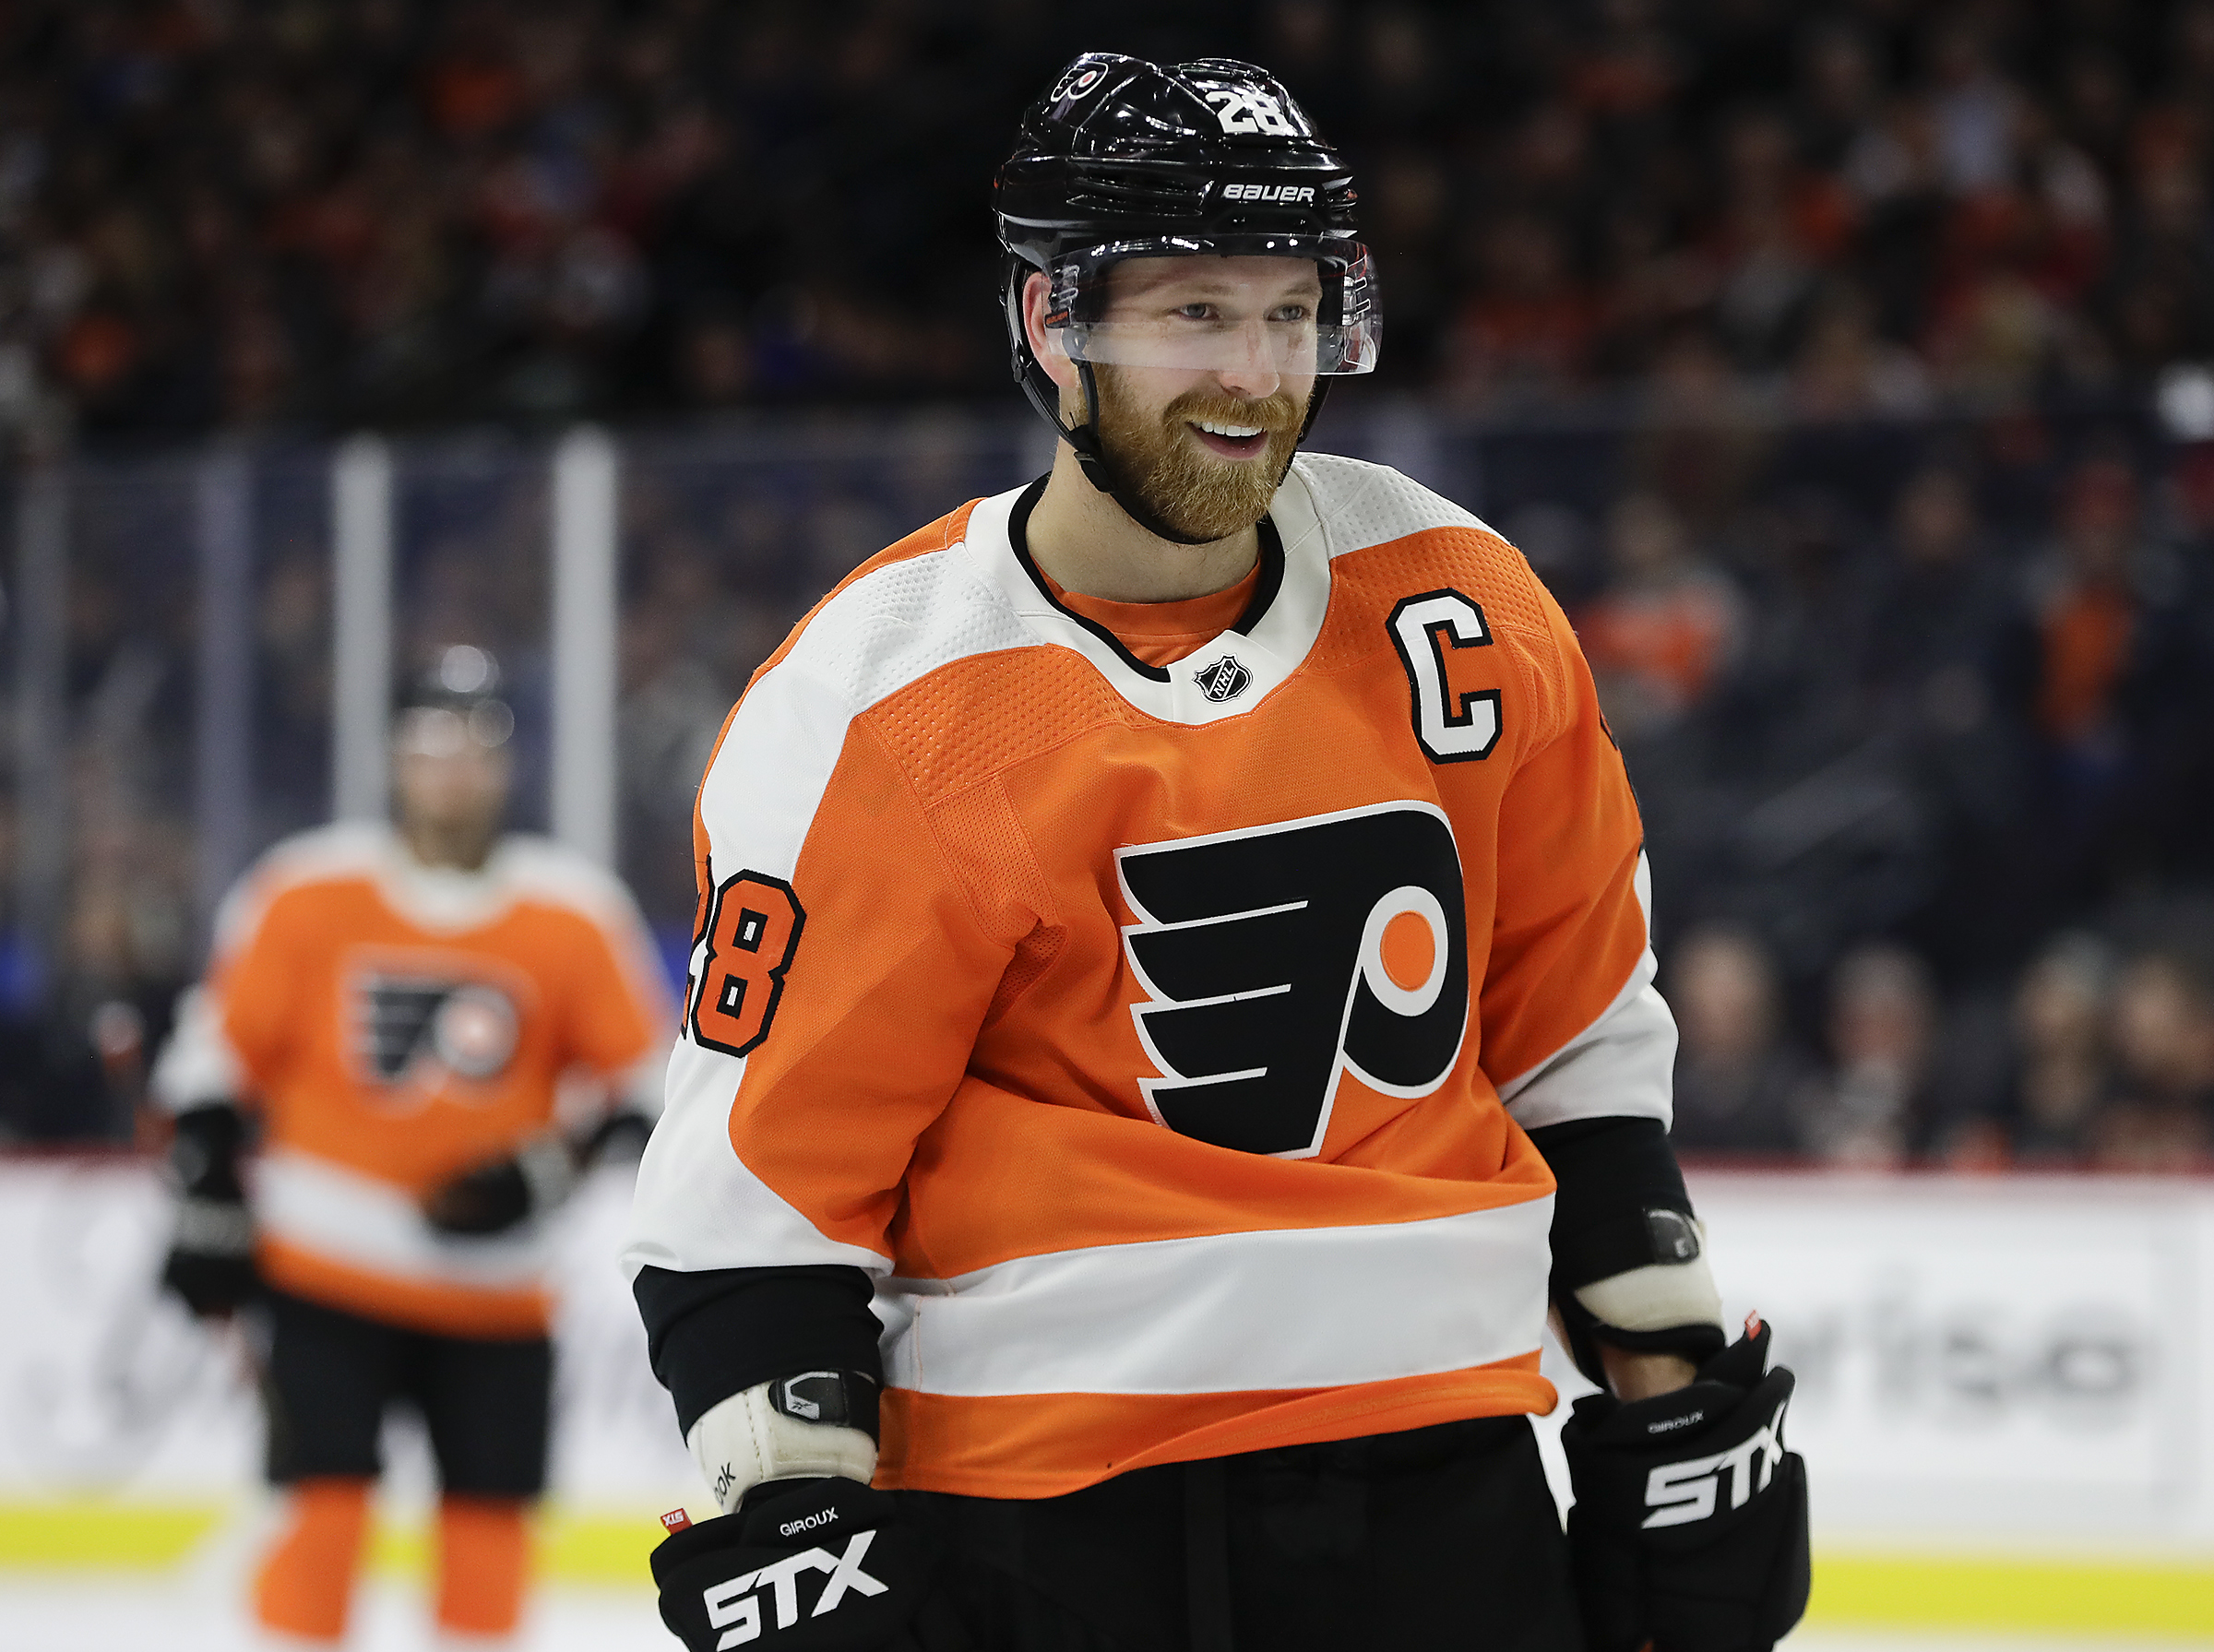 Claude Giroux Continues To Climb Ranks In Flyers History